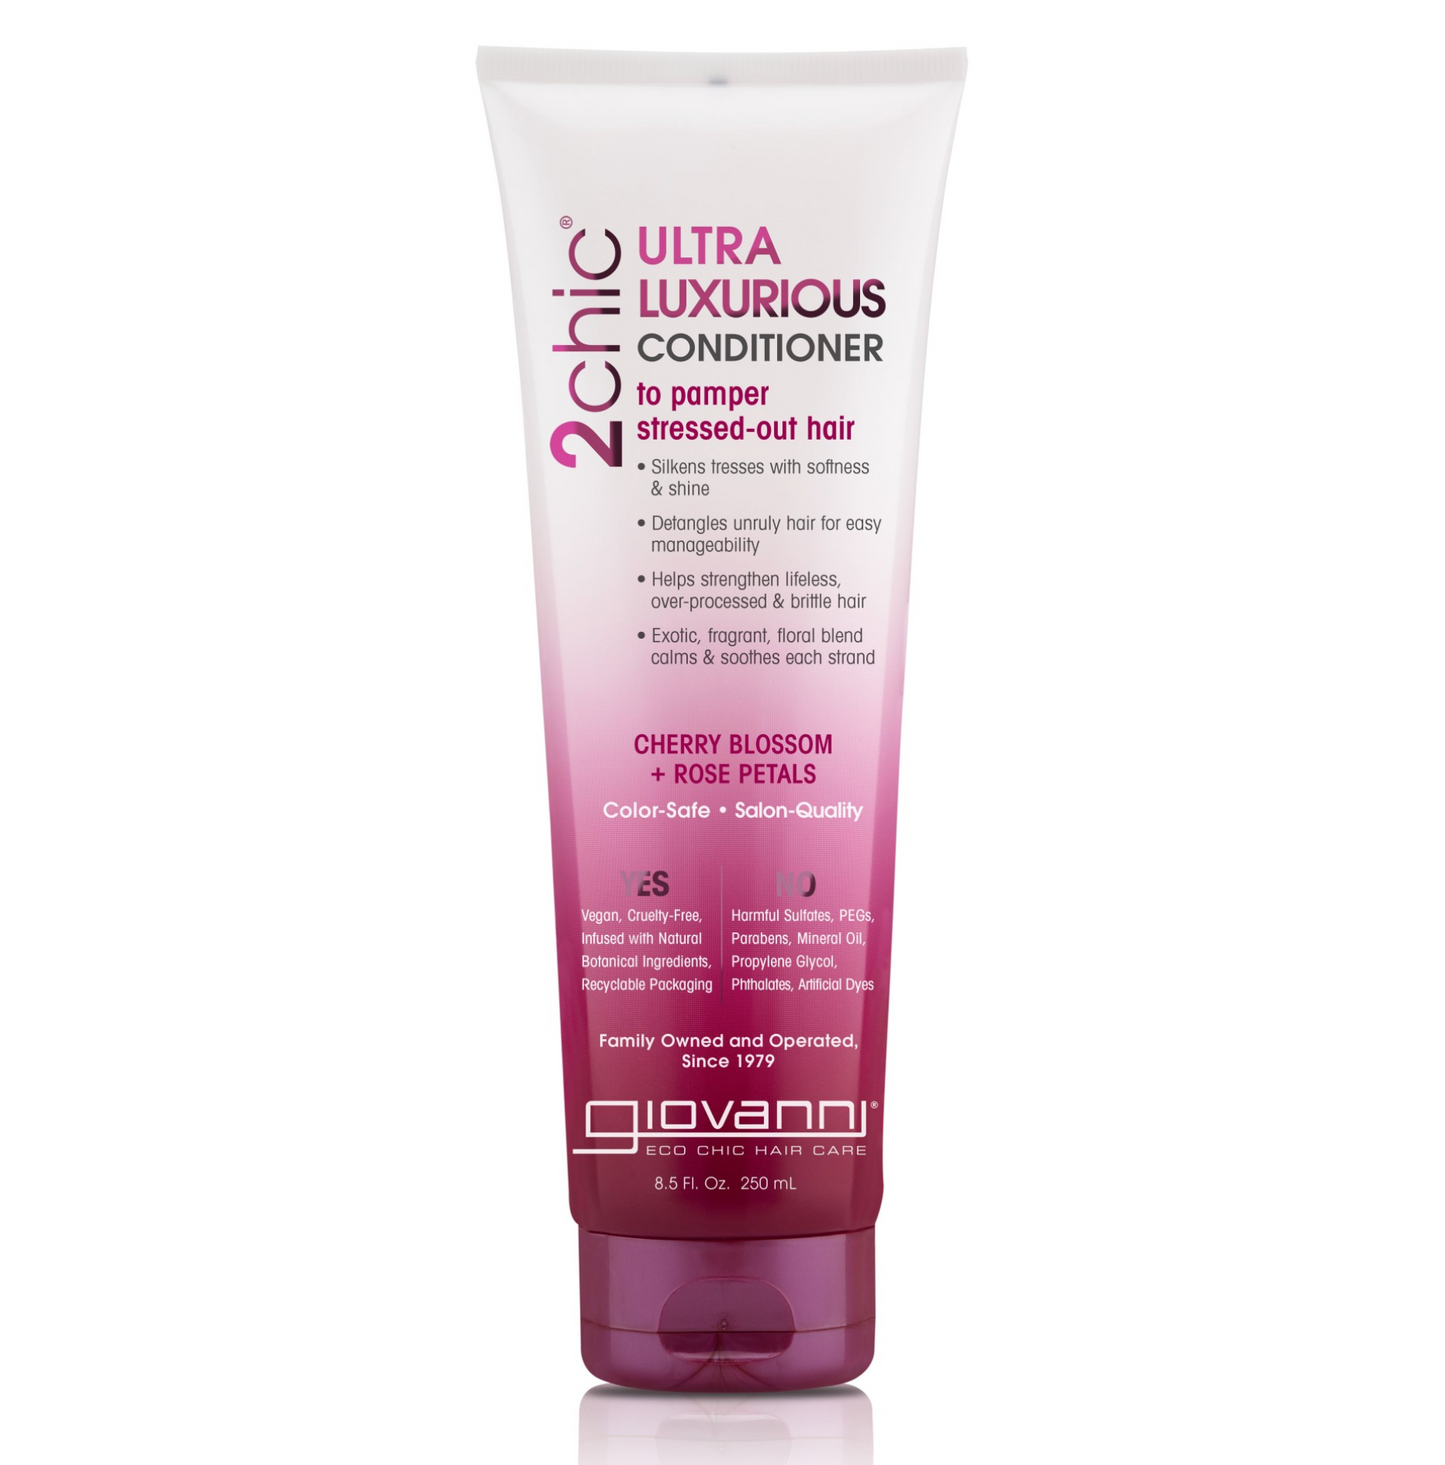 Giovanni 2Chic Ultra-Luxurious Conditioner 44mL Or 250mL, To Pamper Stressed-Out Hair